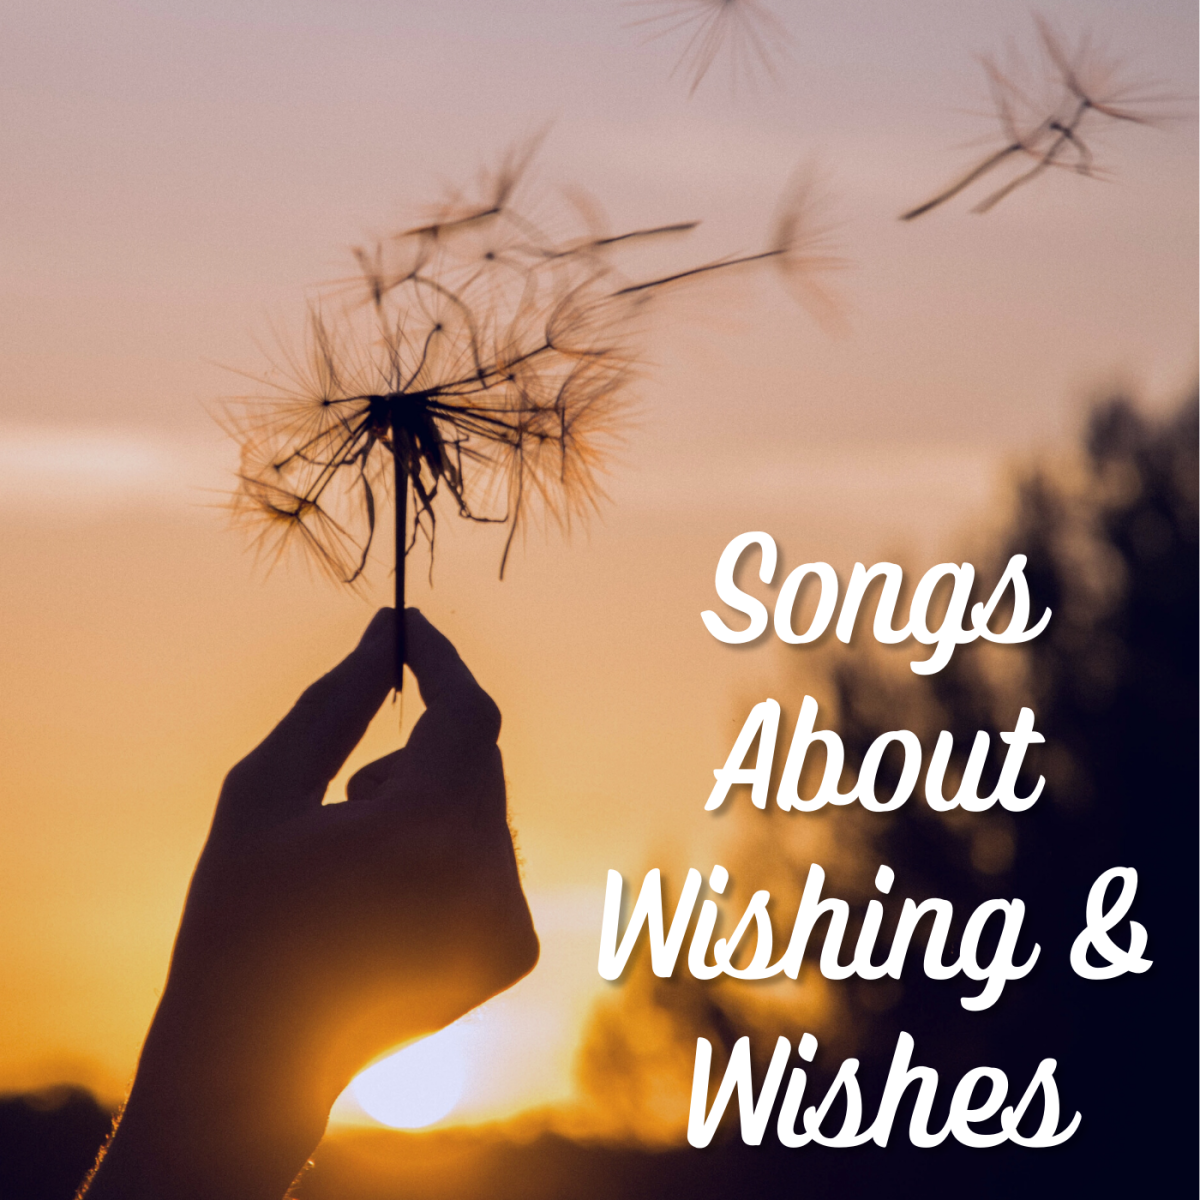 47 Songs About Wishes